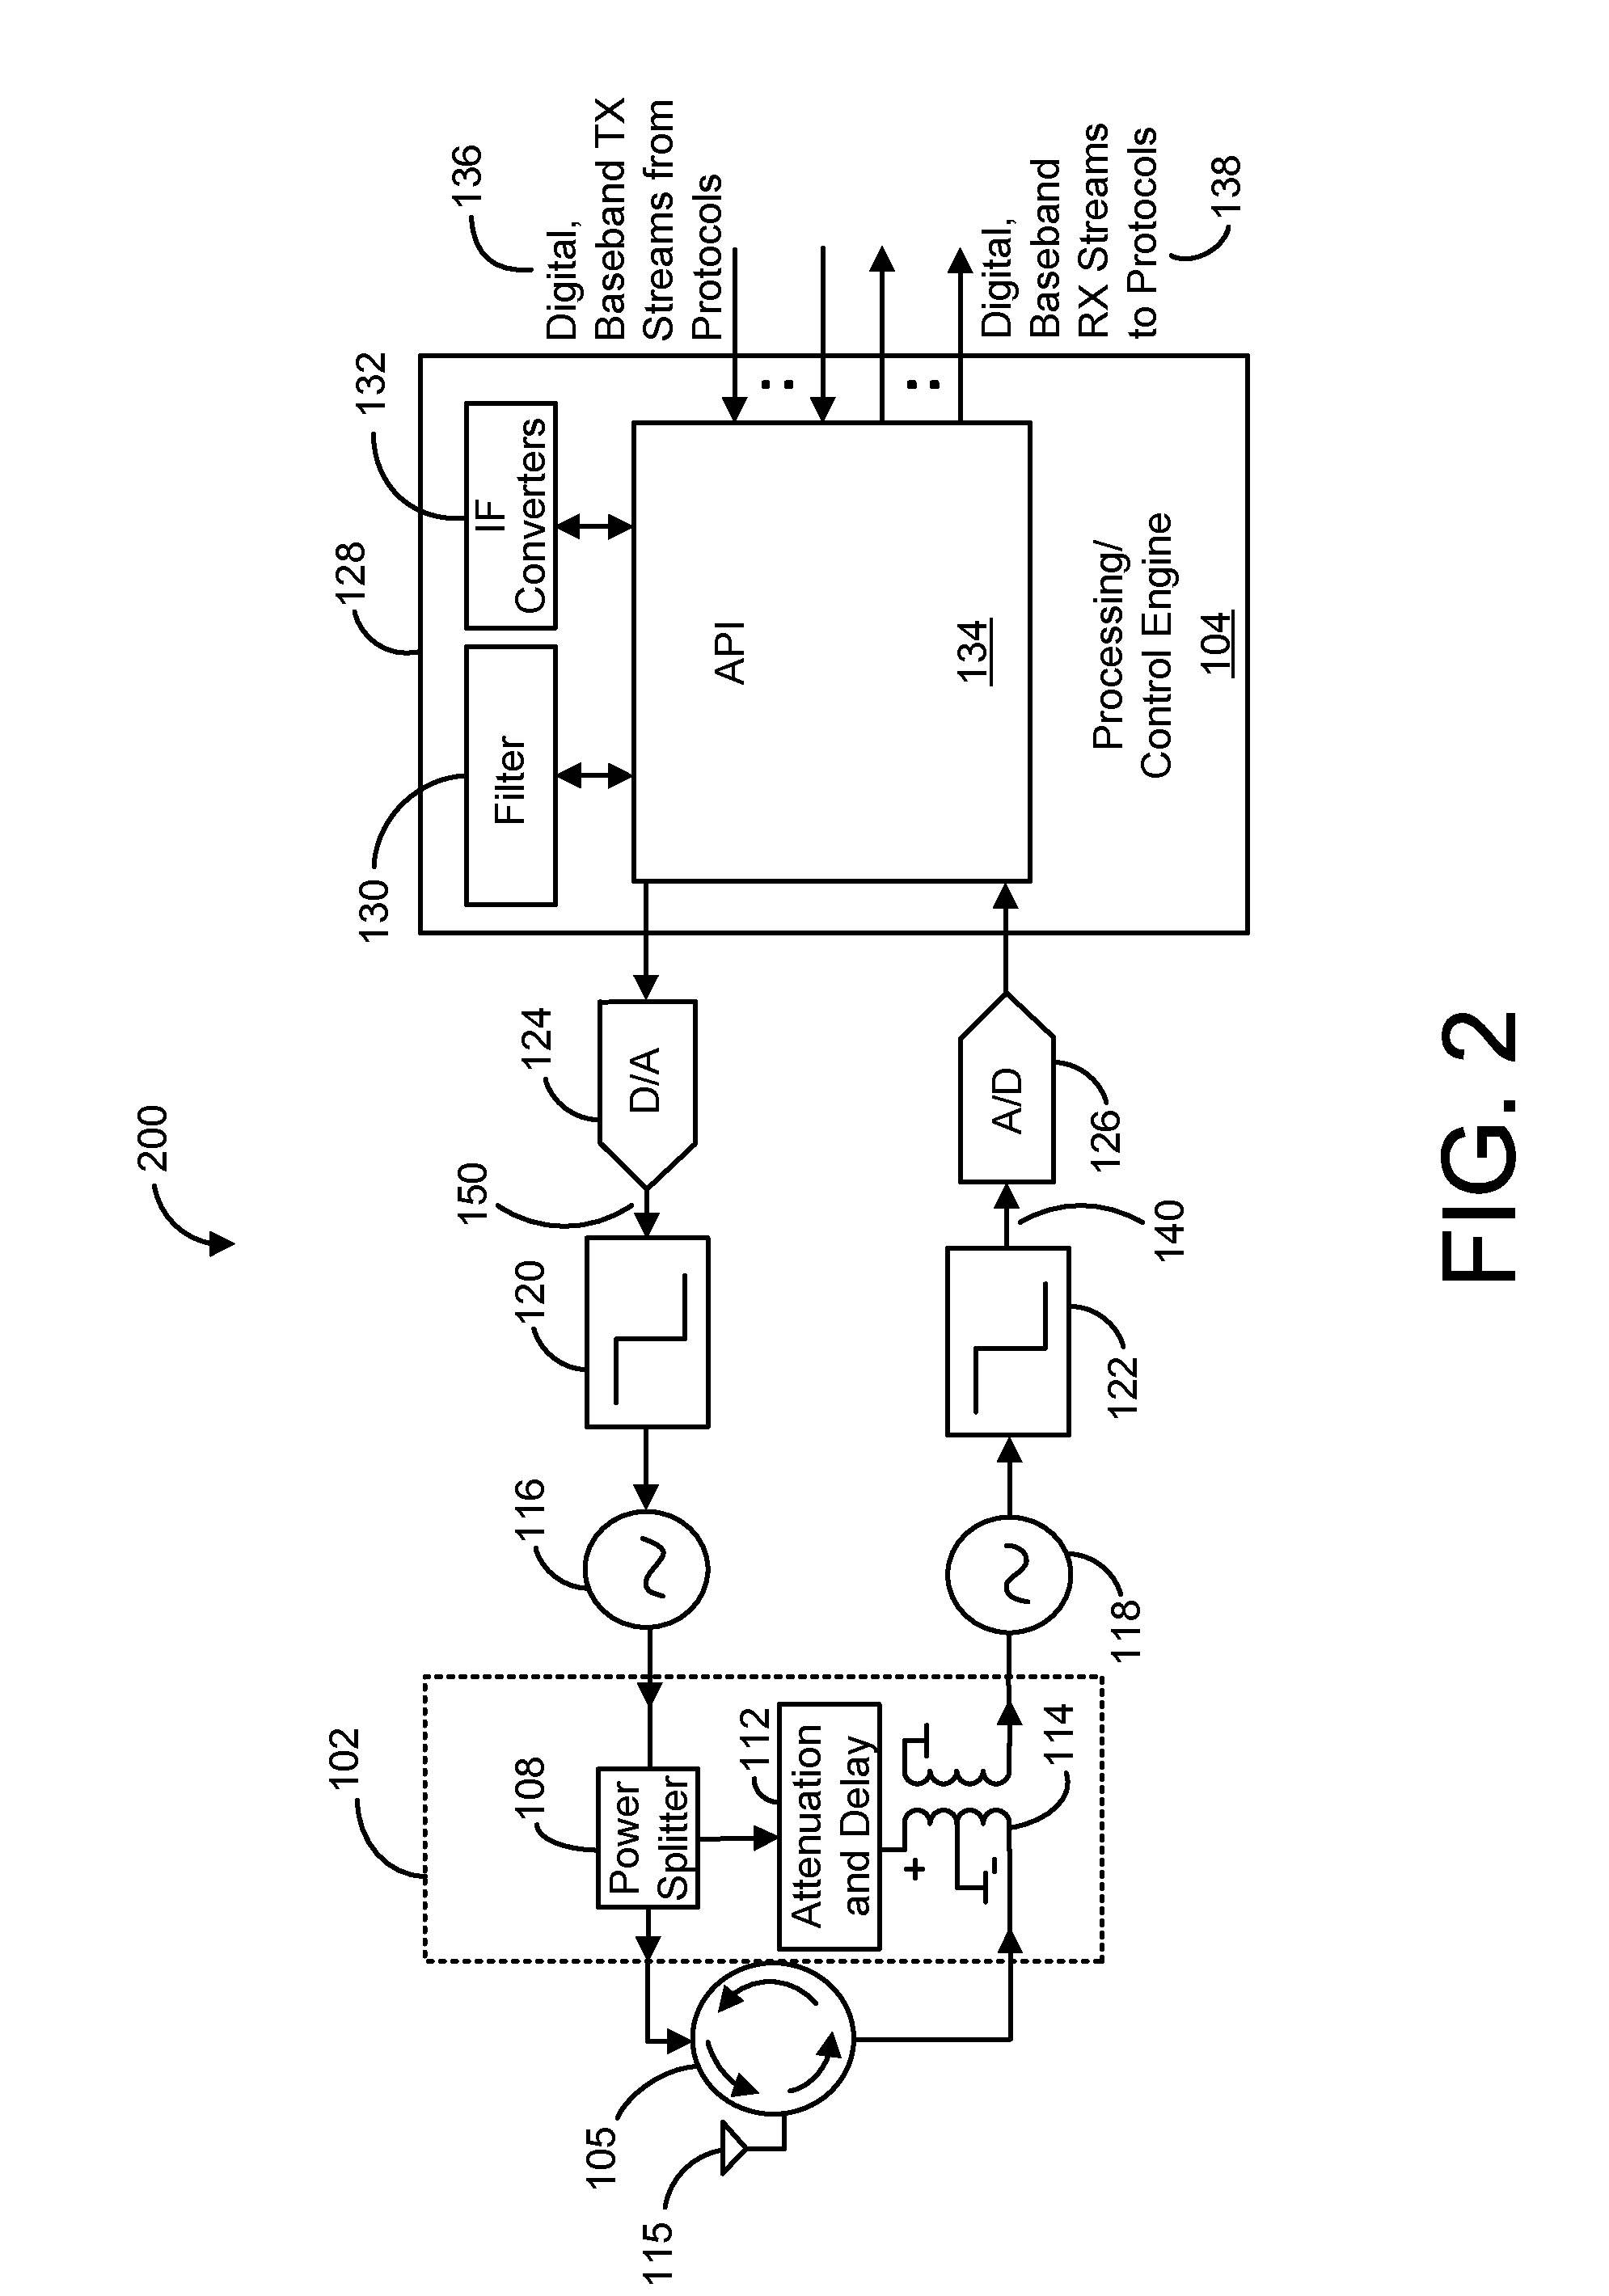 Systems and methods for cancelling interference using multiple attenuation delays